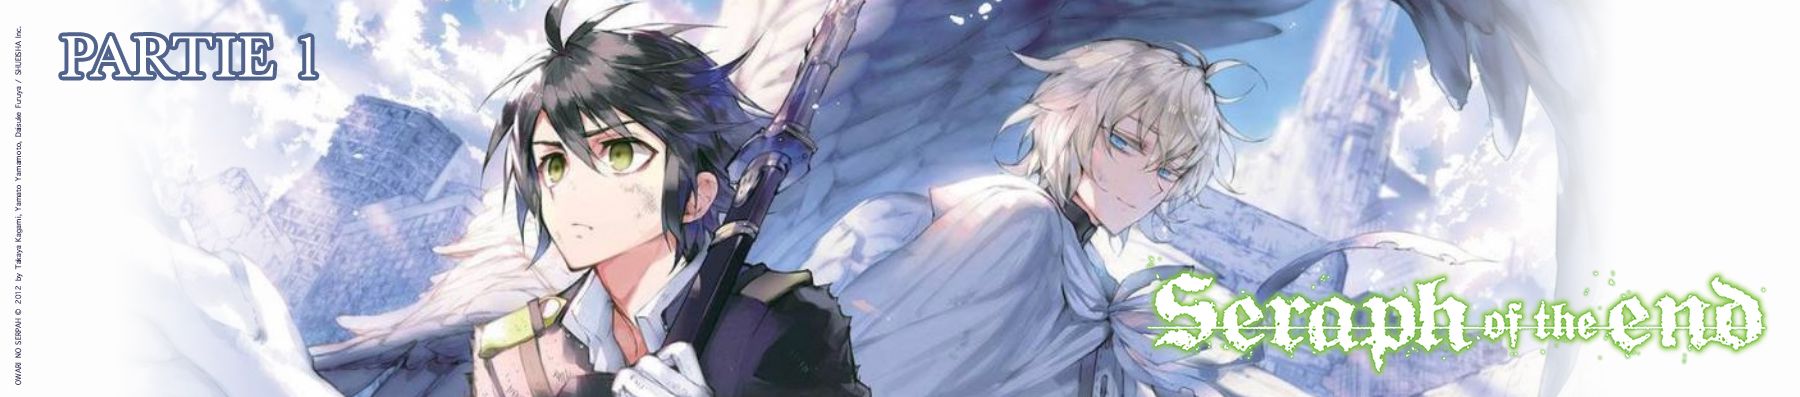 dossier manga - Seraph of the End - Partie 1